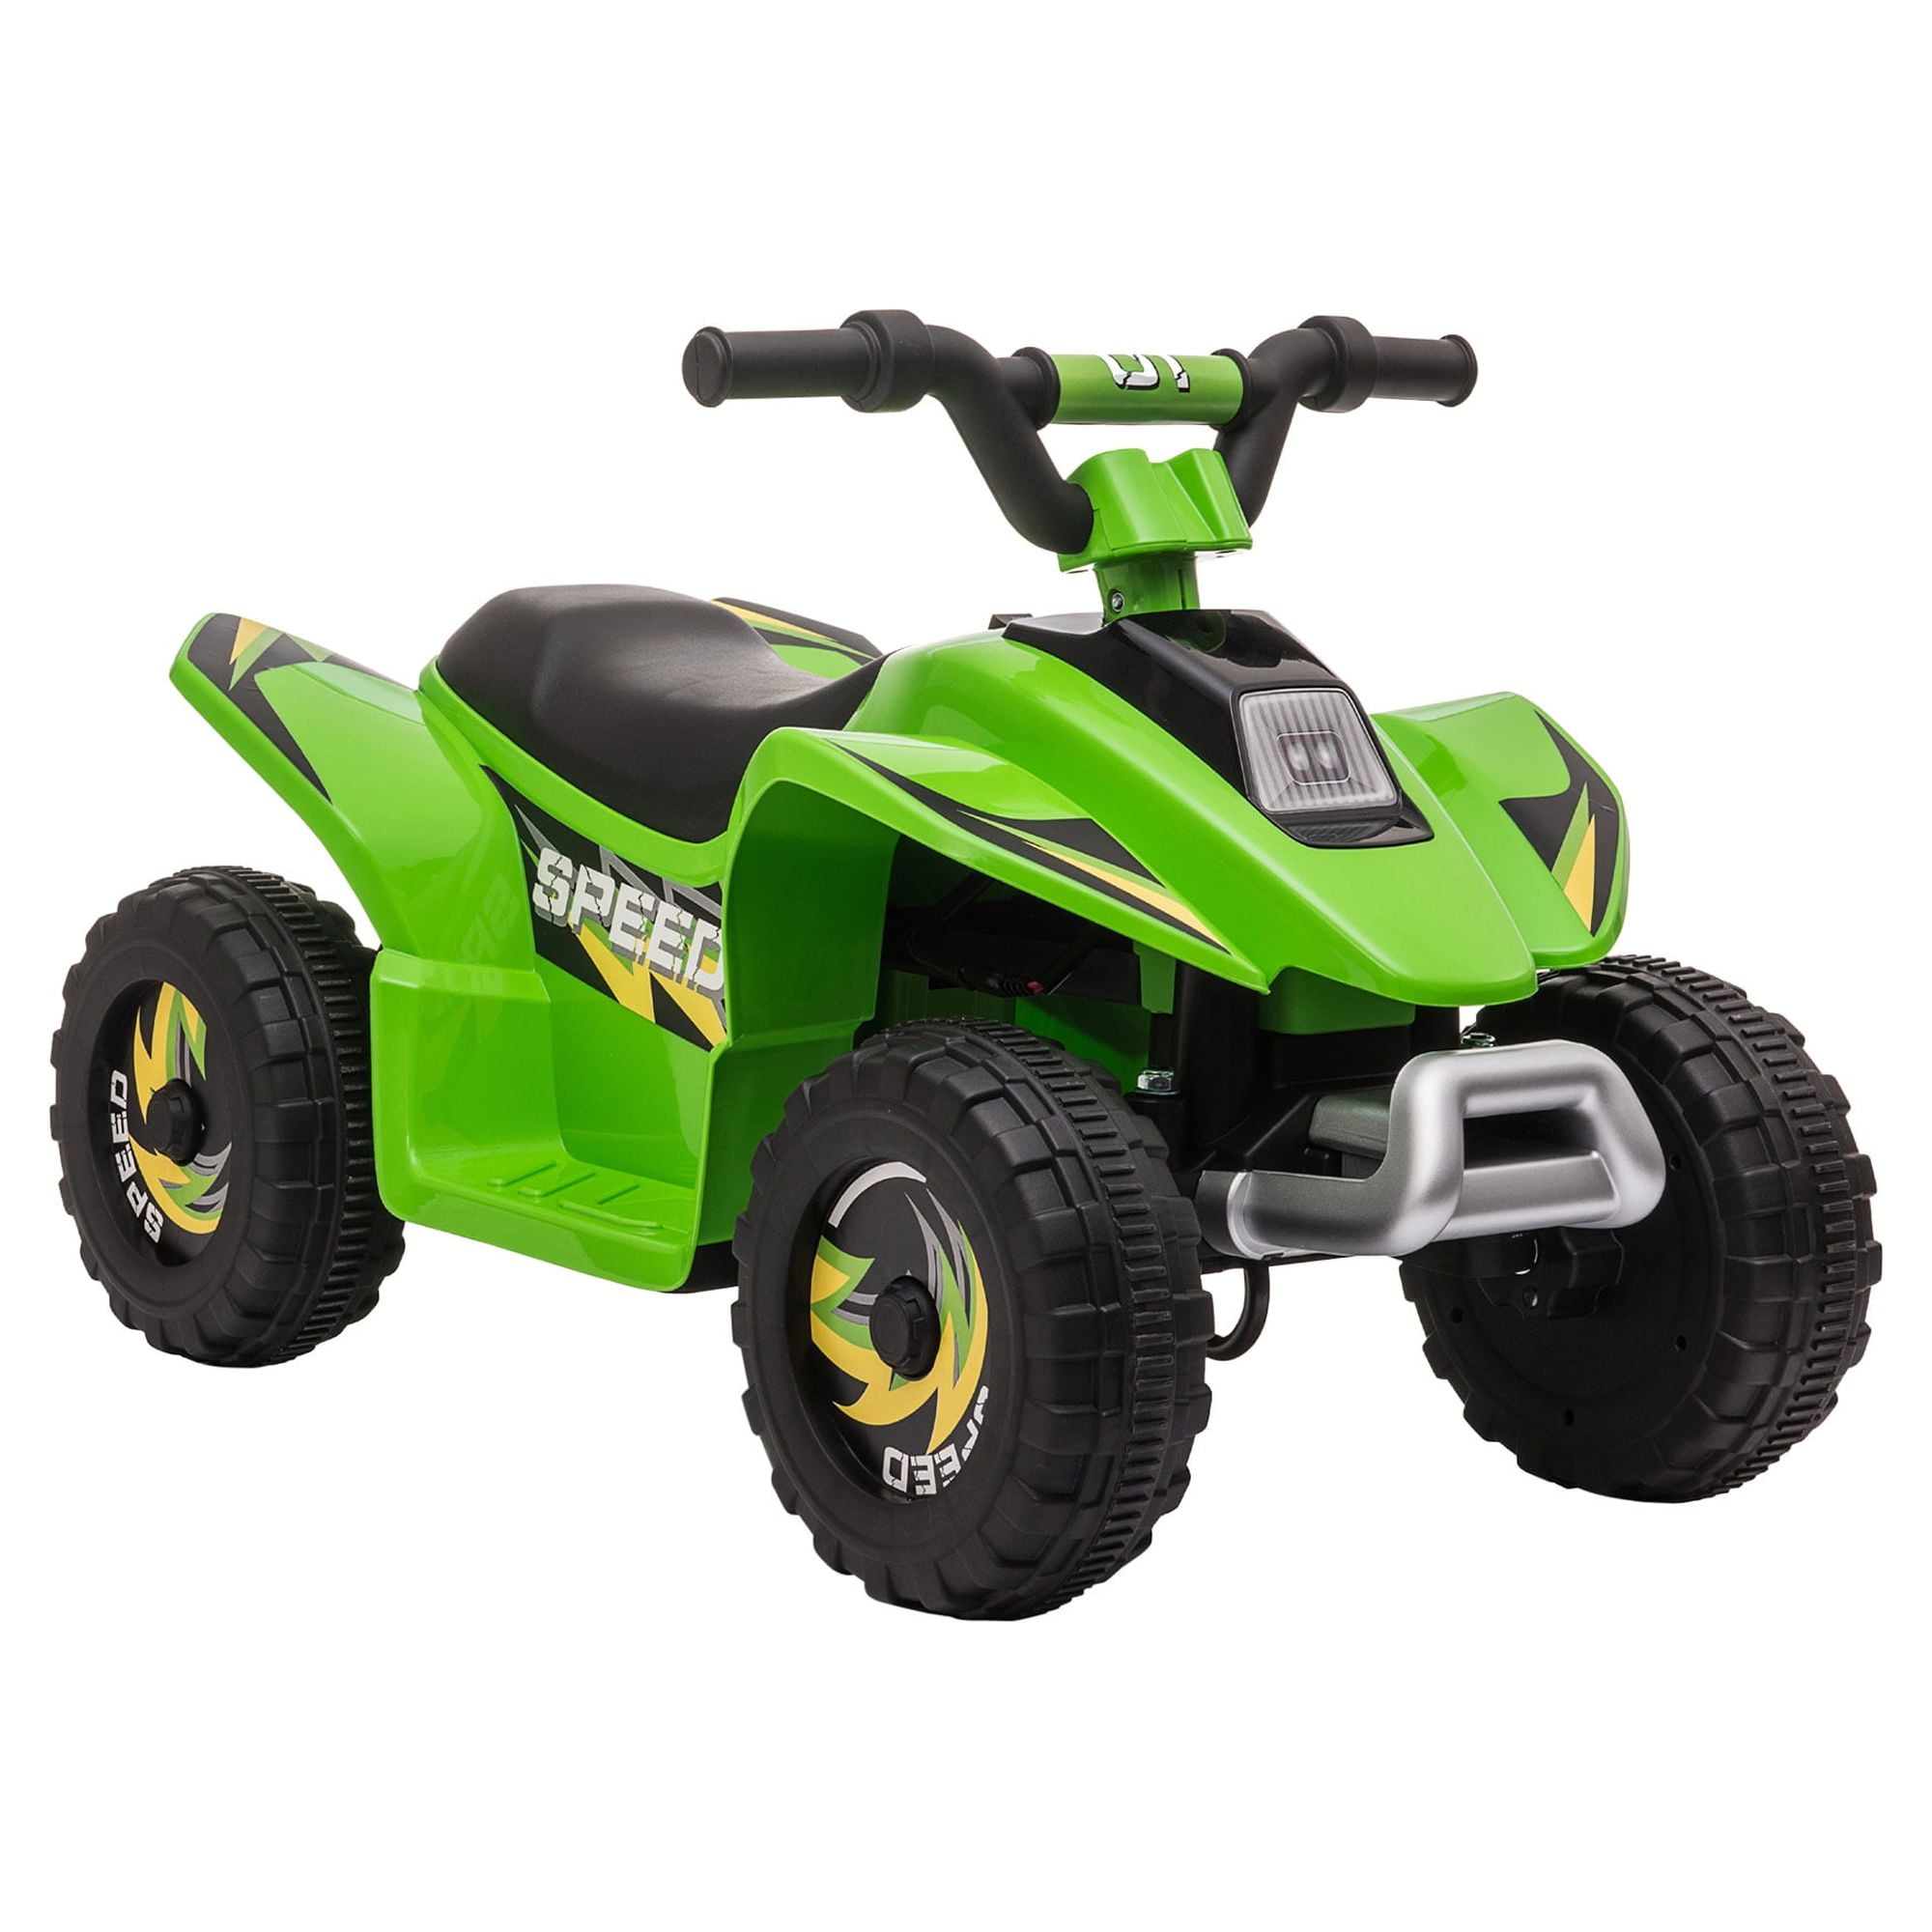 Aosom 6V Kids ATV 4-Wheeler Ride on Car, Electric Motorized Quad Battery  Powered Vehicle with Forward/Reverse Switch for 18-36 Months Old Toddlers, 